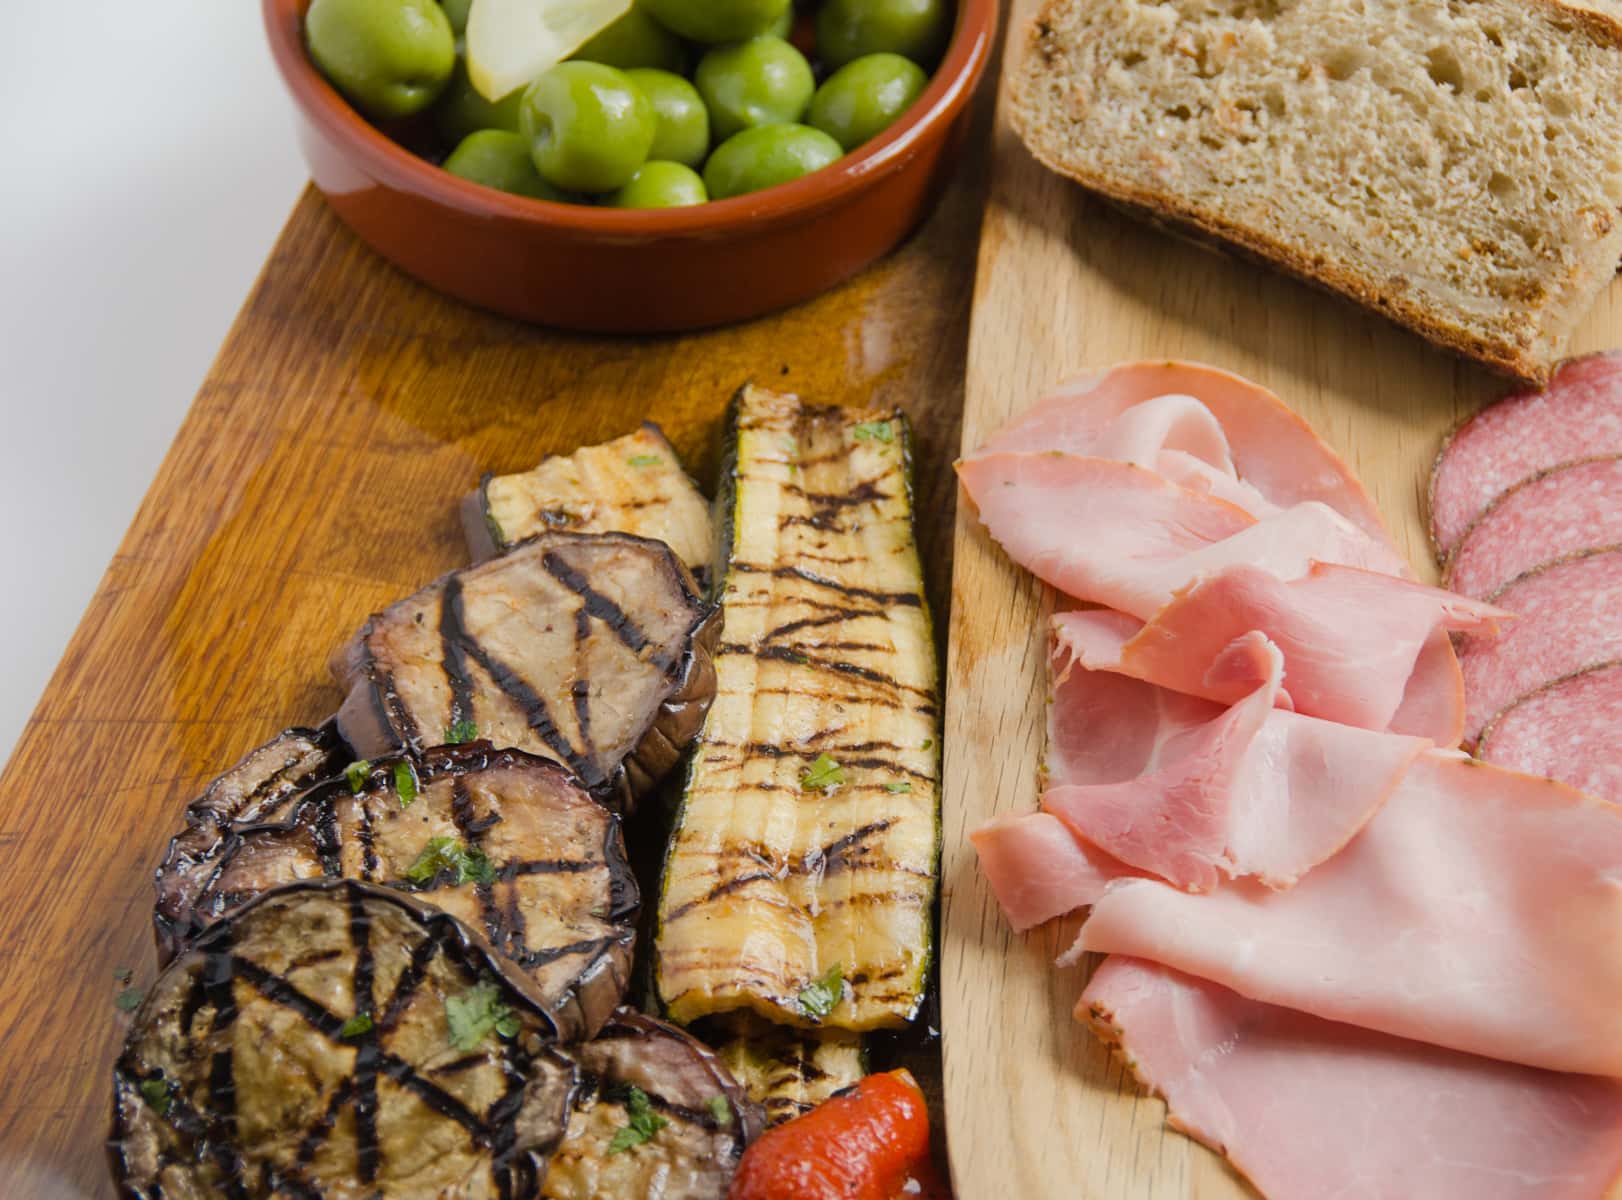 An antipasti board of marinated aubergine, courgette and peppers with cured meats, bread and olives.